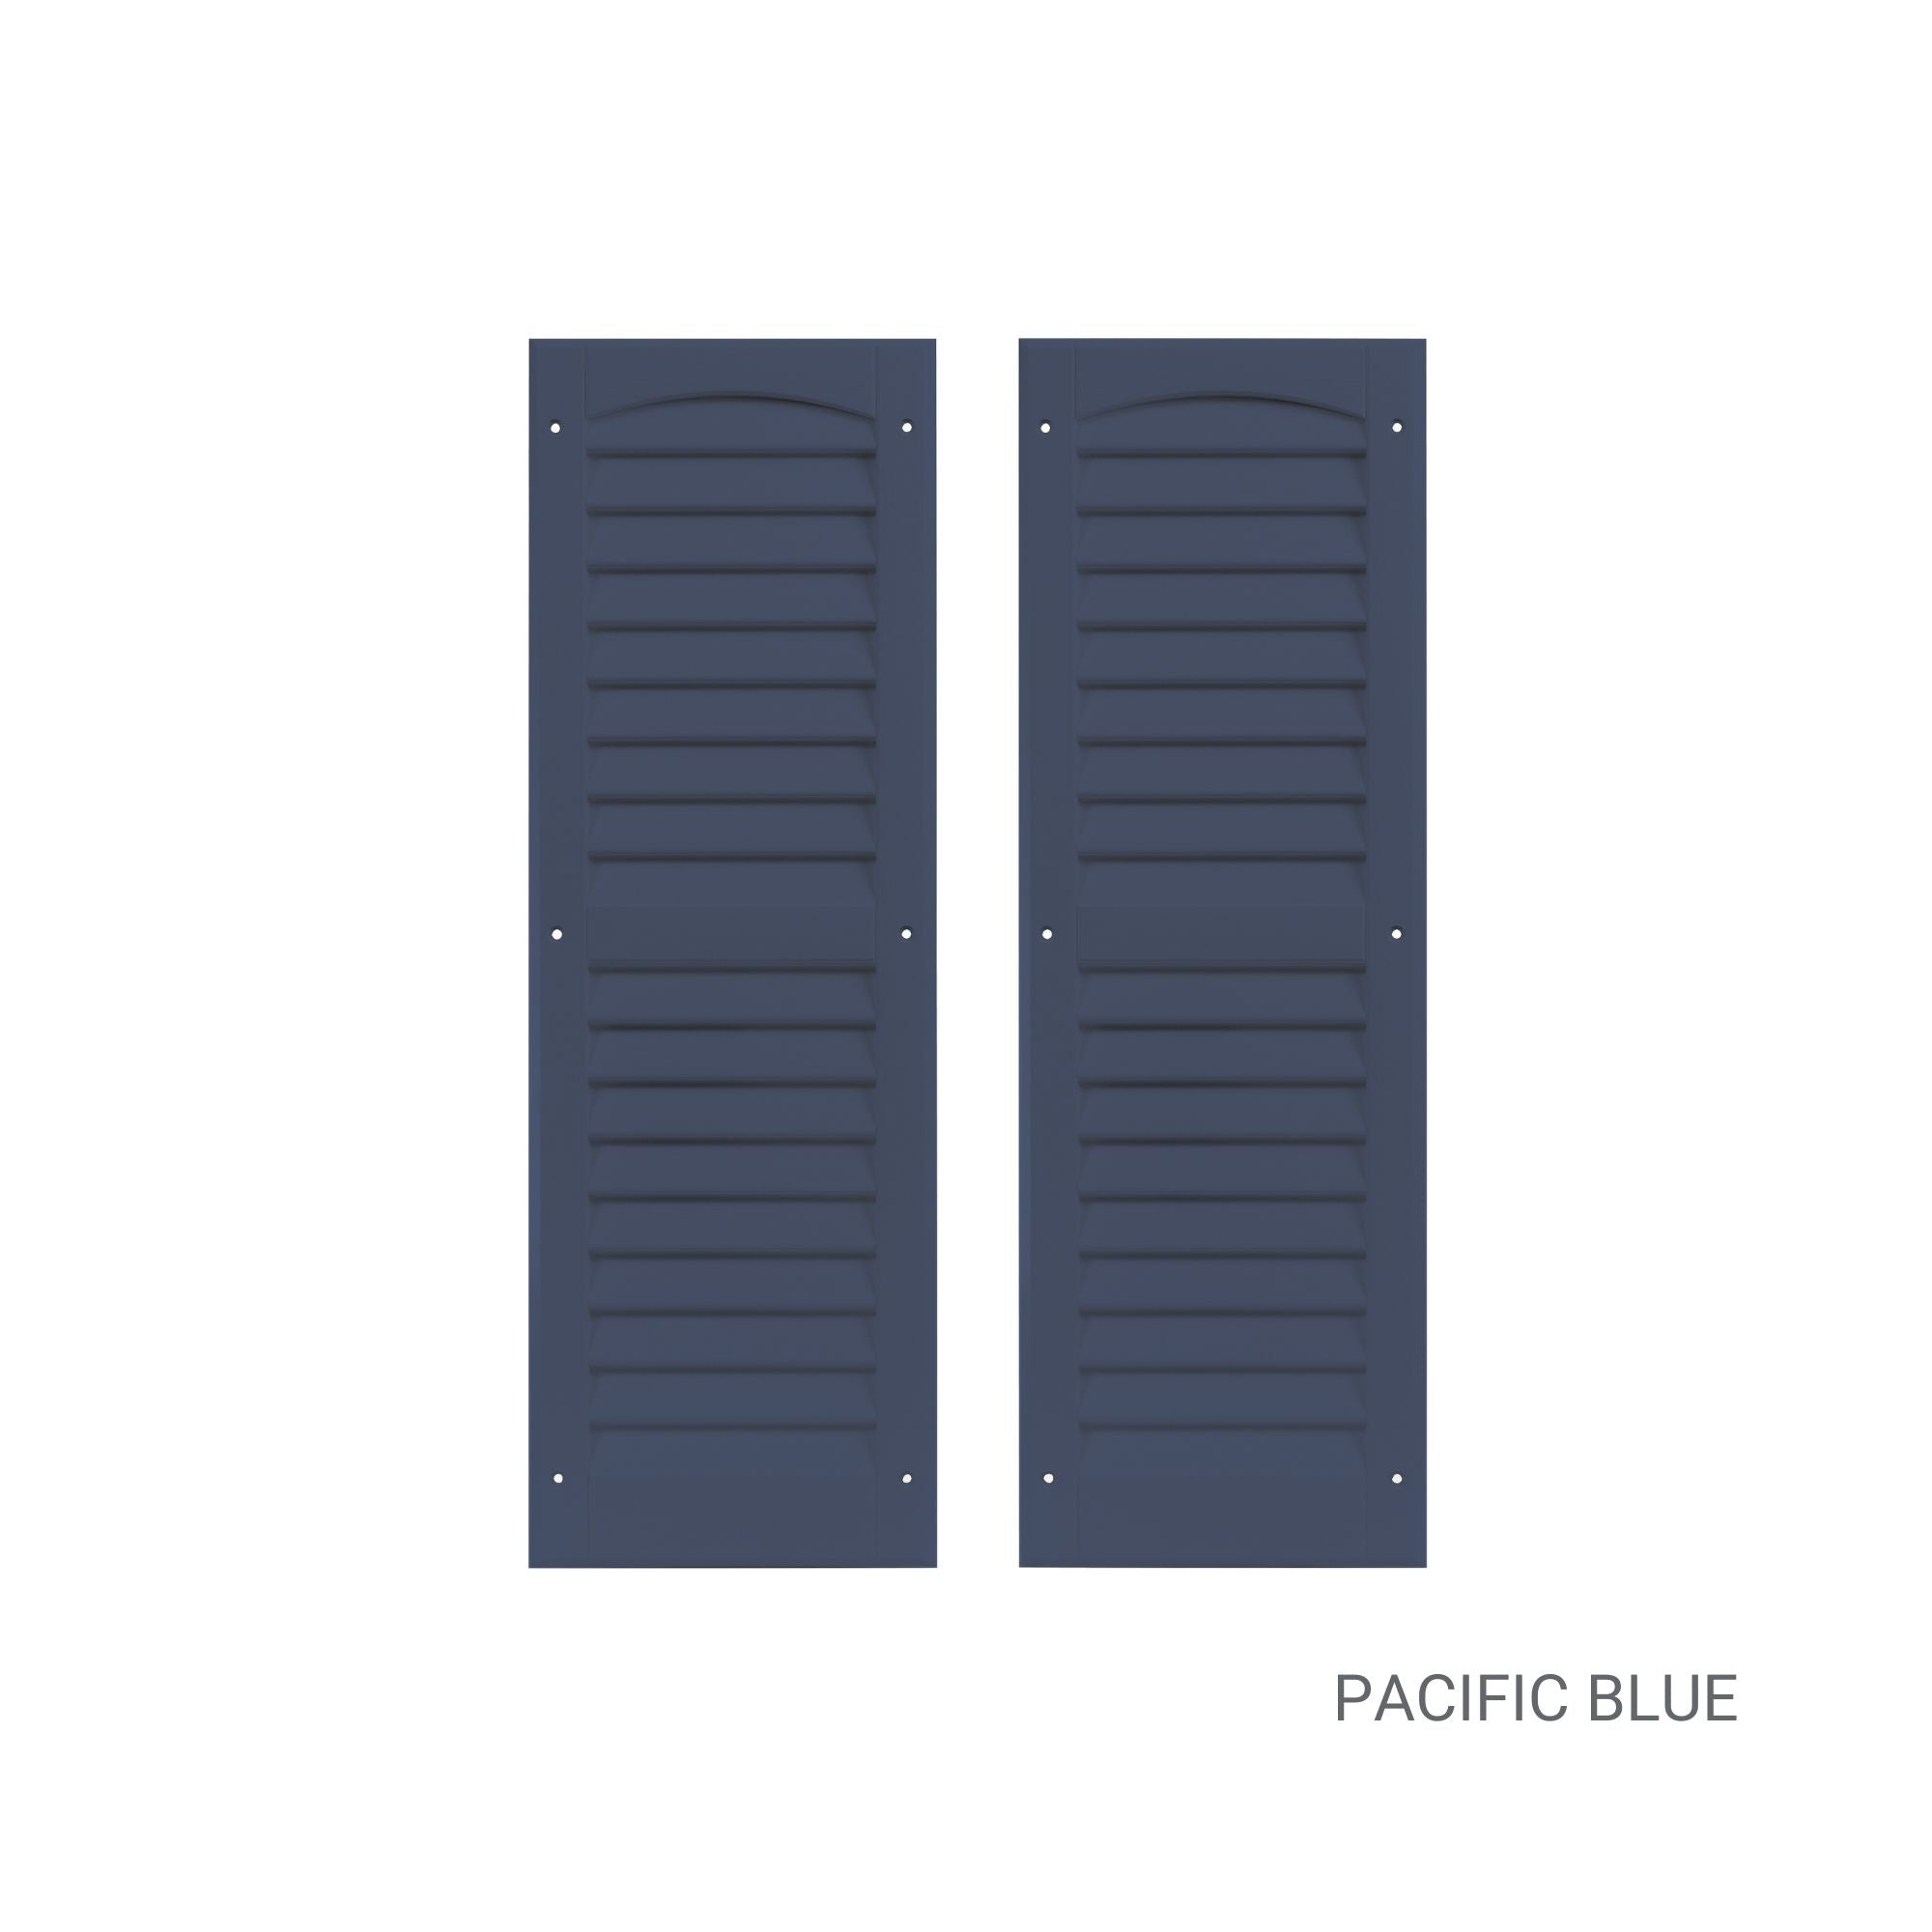 Pair of 9" W x 27" H Louvered Pacific Blue Shutters for Sheds, Playhouses, and MORE